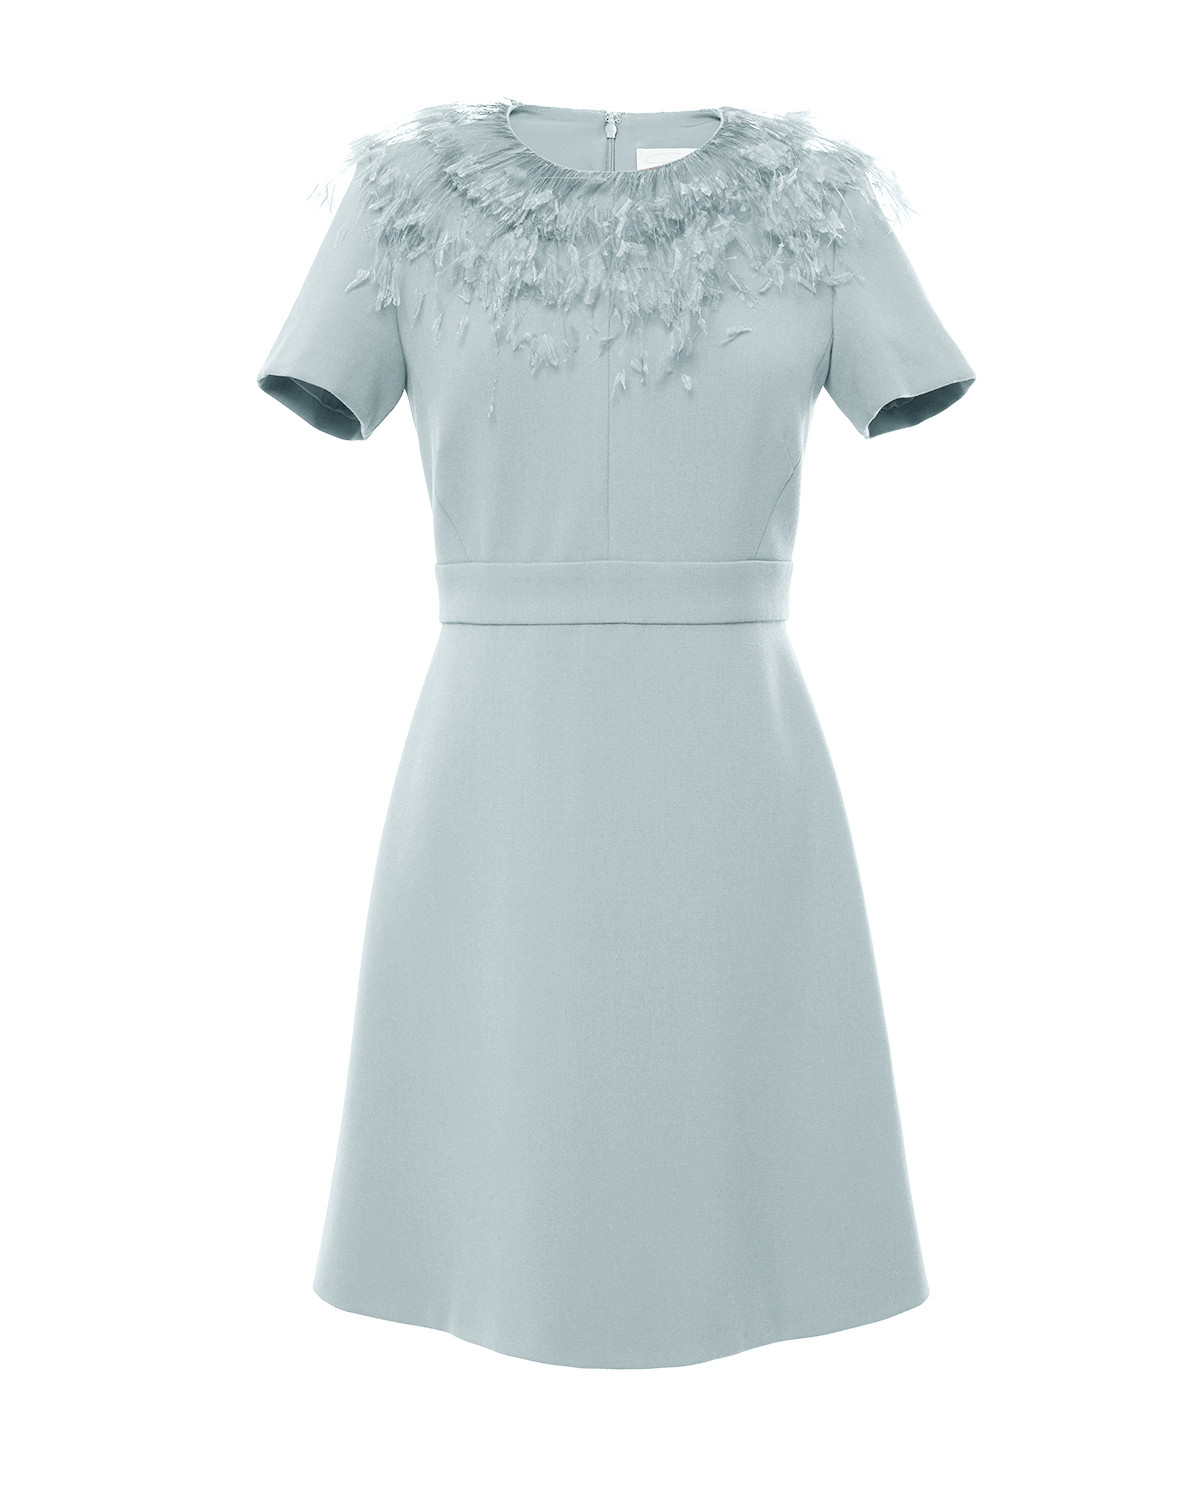 Light blue jersey mini dress with feathers